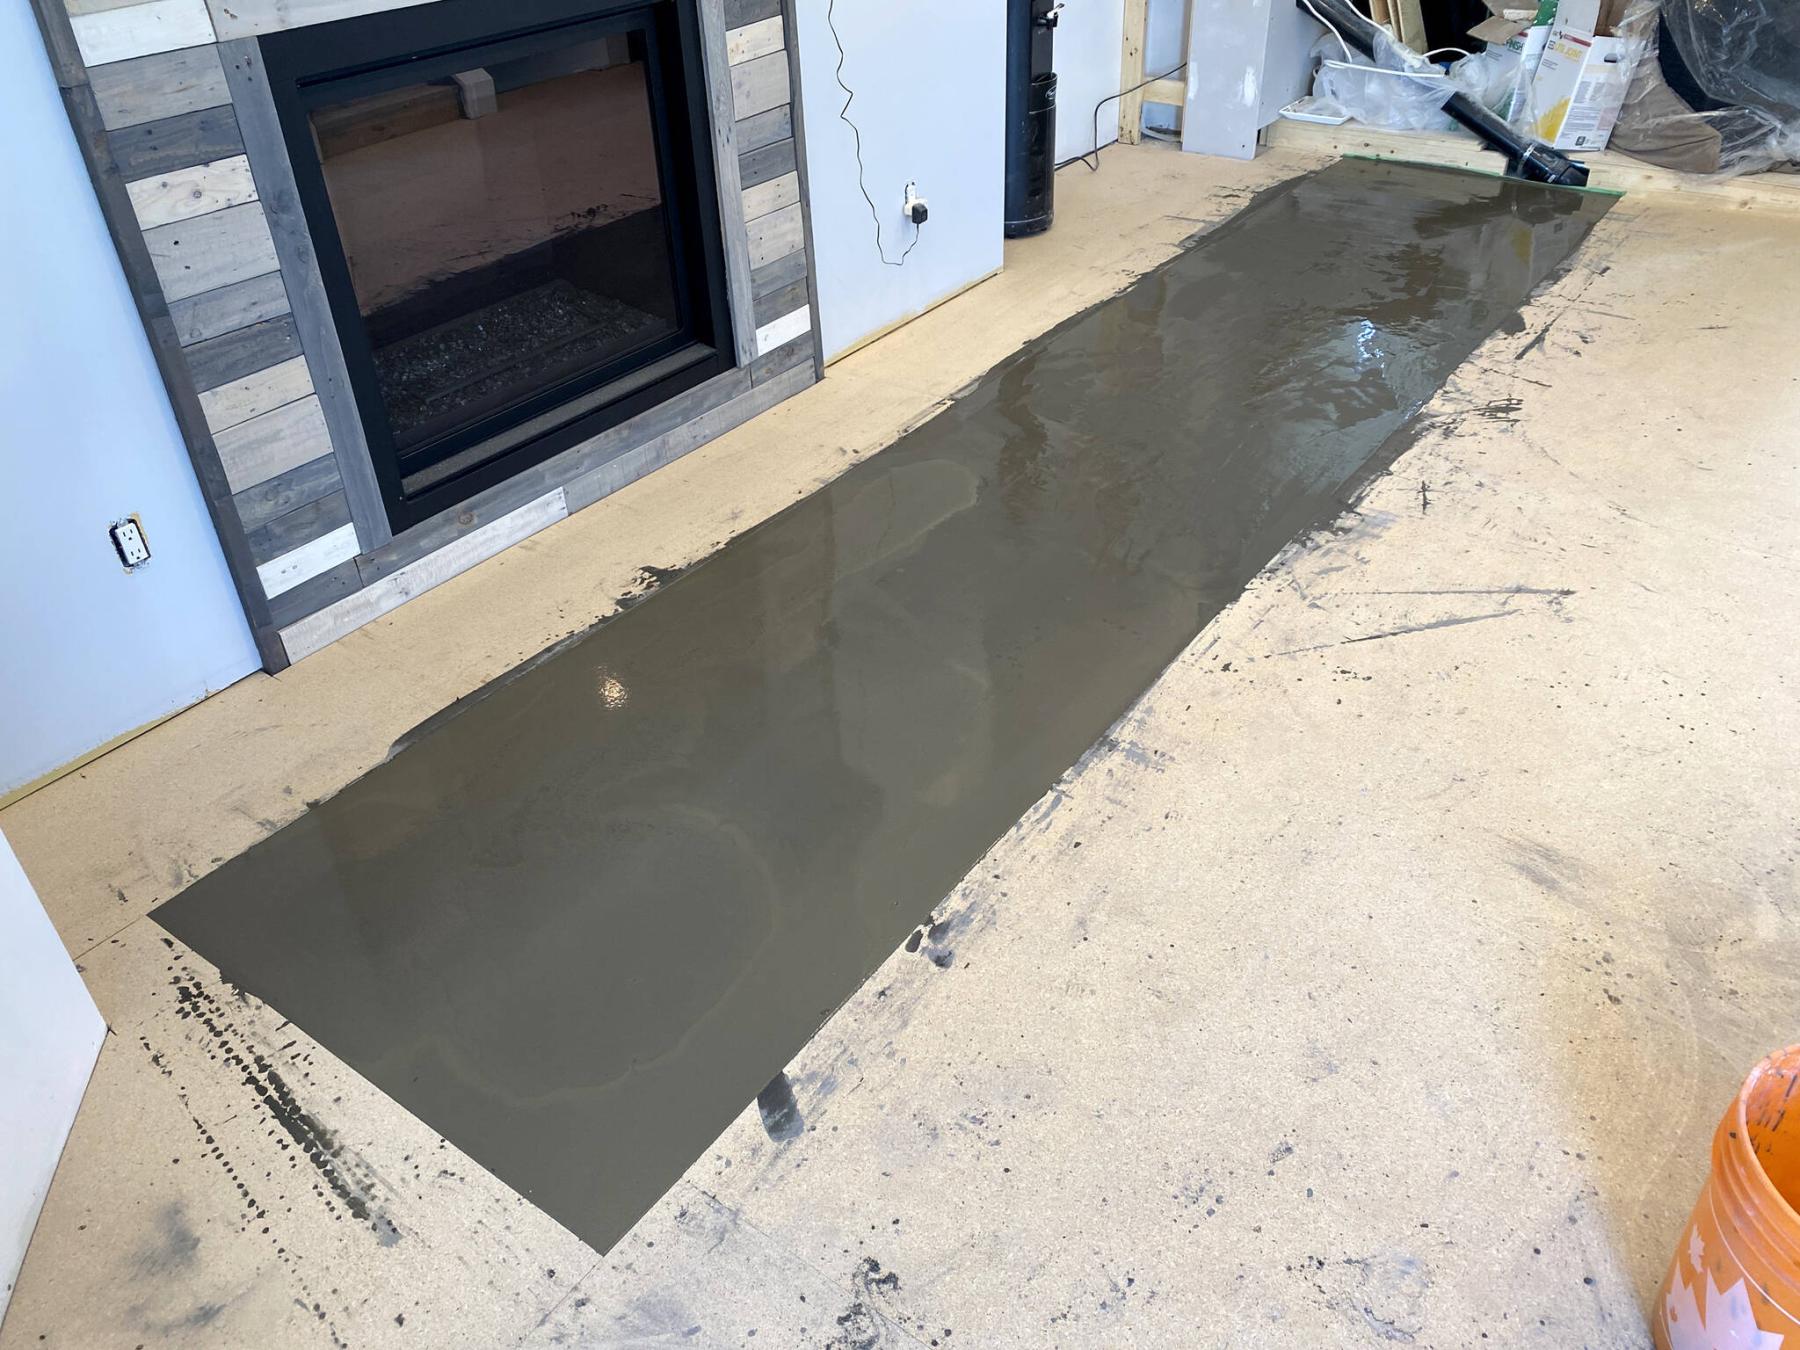  <p>Photos by Marc LaBossiere / Winnipeg Free Press</p>
                                <p>Self-levelling compound is used to eliminate a hump along one seam of the adjacent plywood subfloor.</p> 